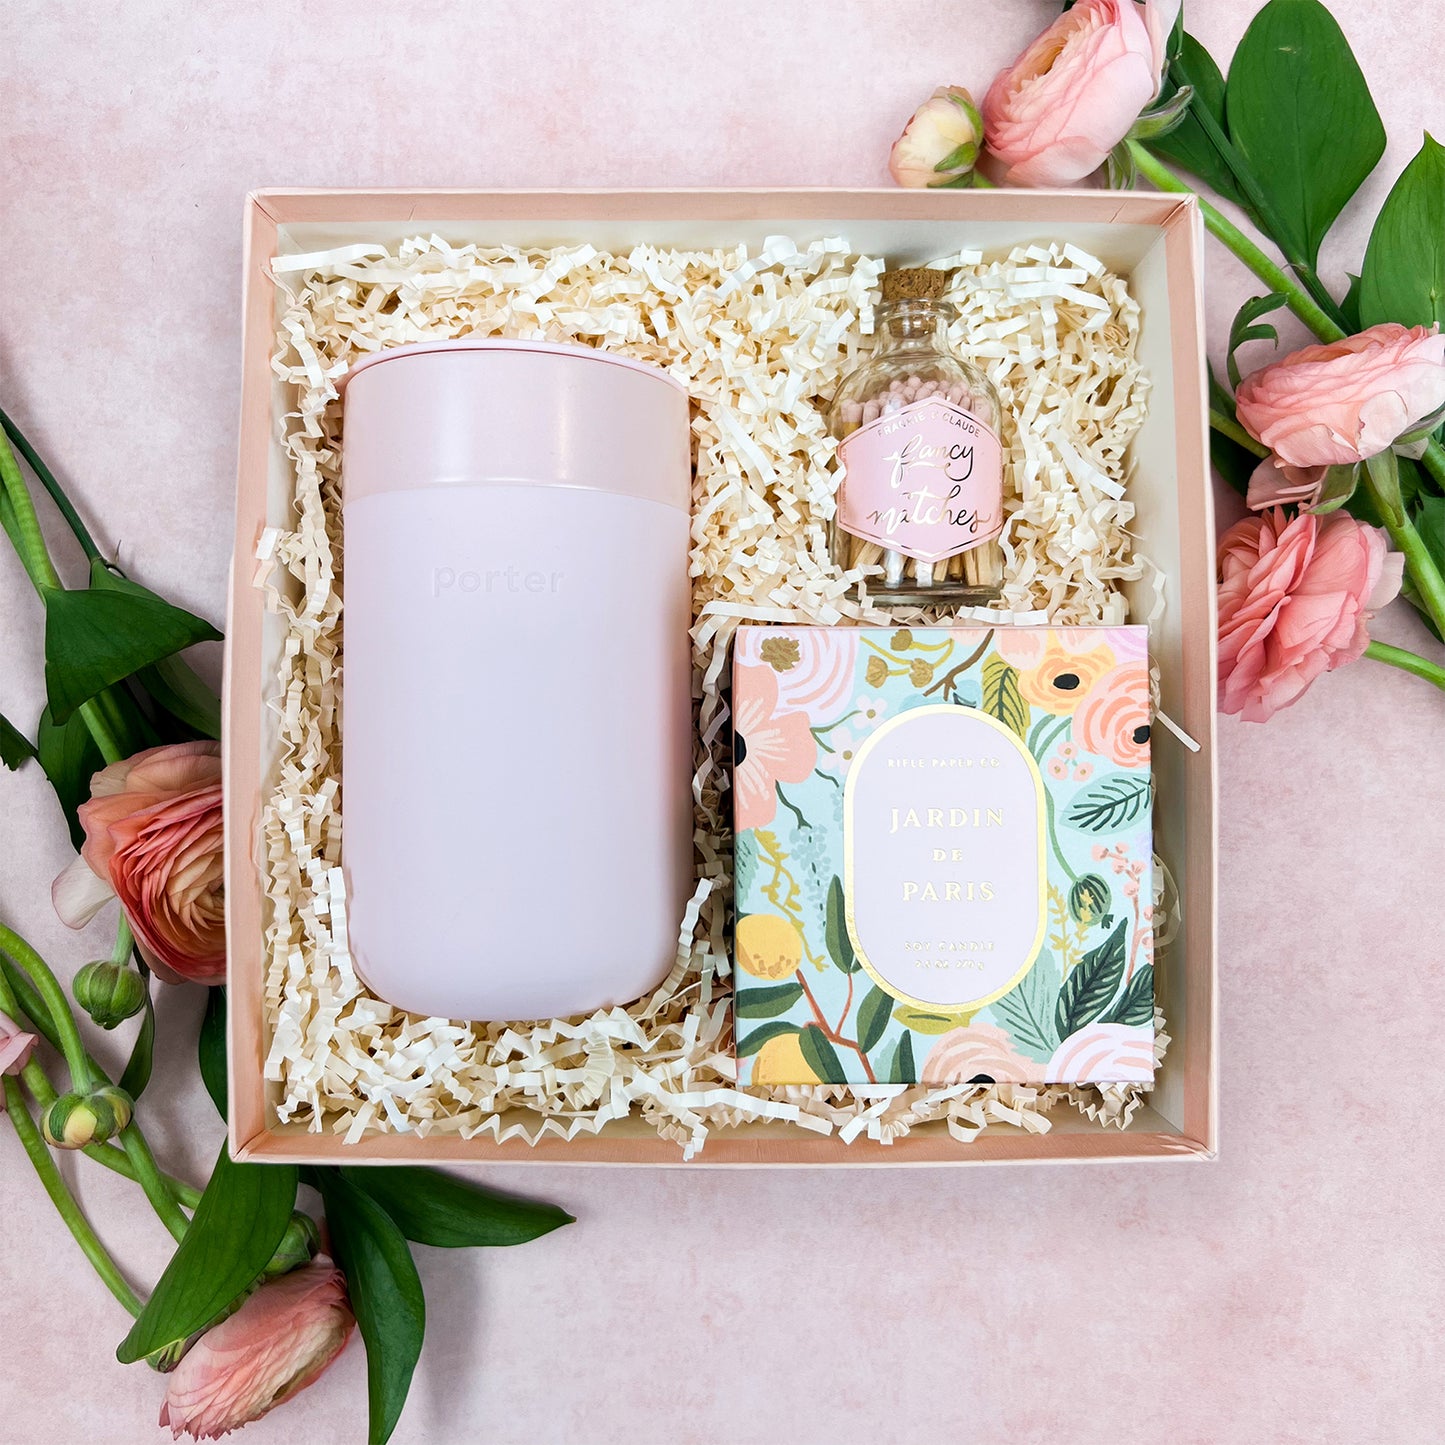 Morning Blooms Luxury Curated Gift Box For Women from Luxe & Bloom